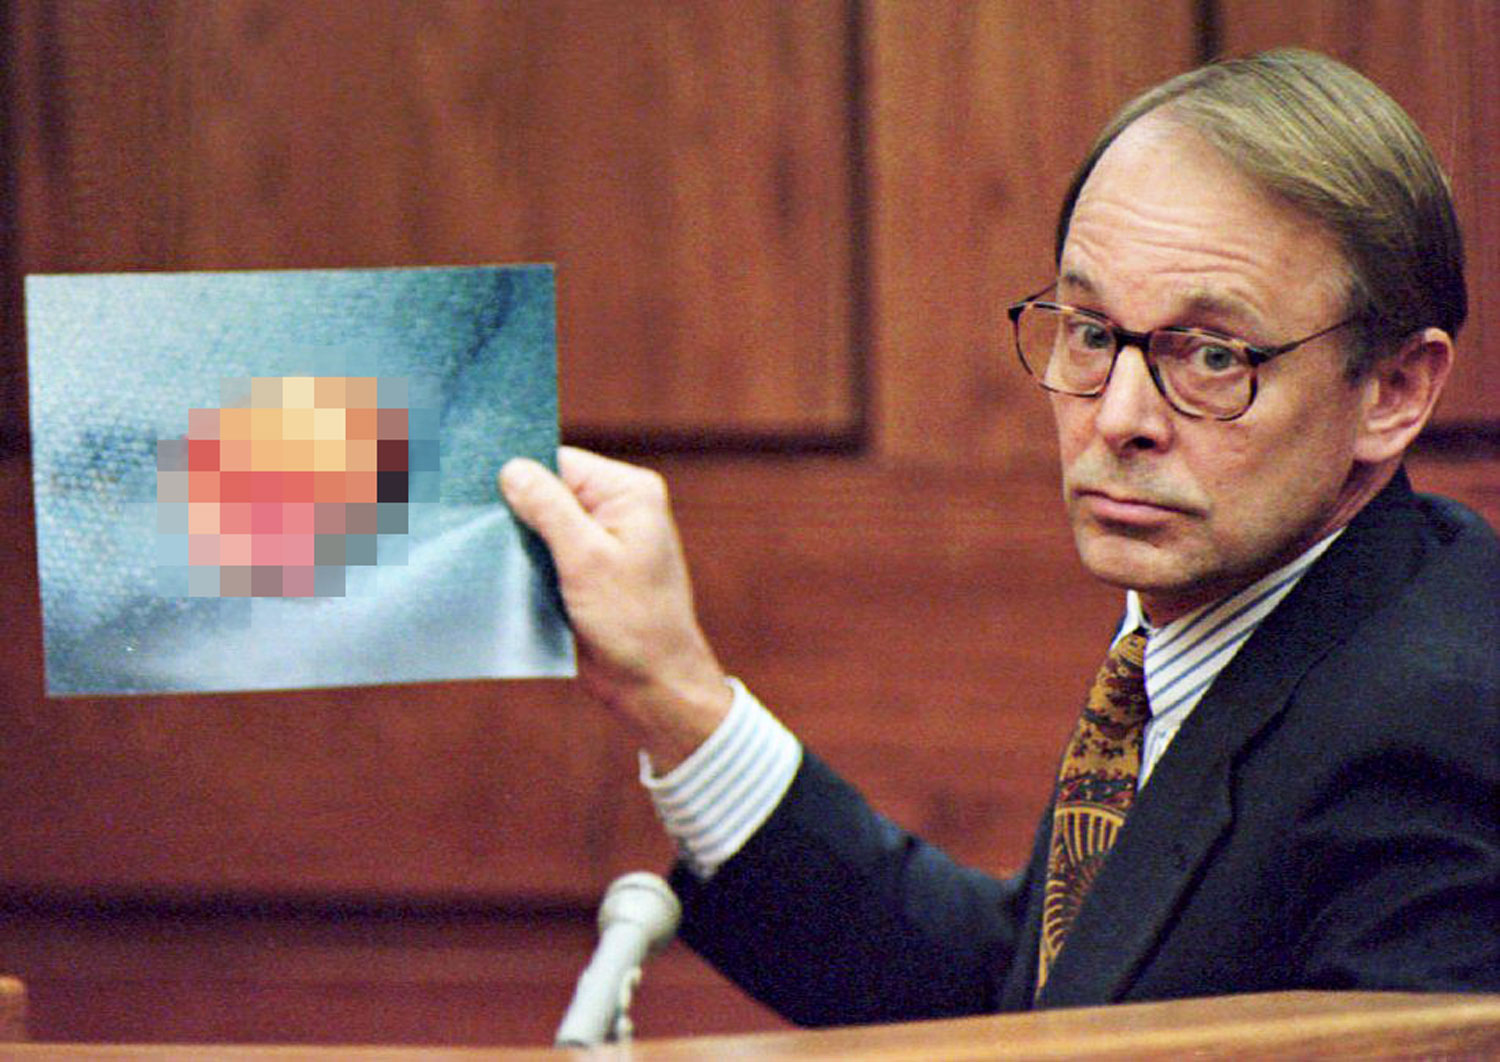 A picture of the severed organ was shown in court and the case created a media firestorm.